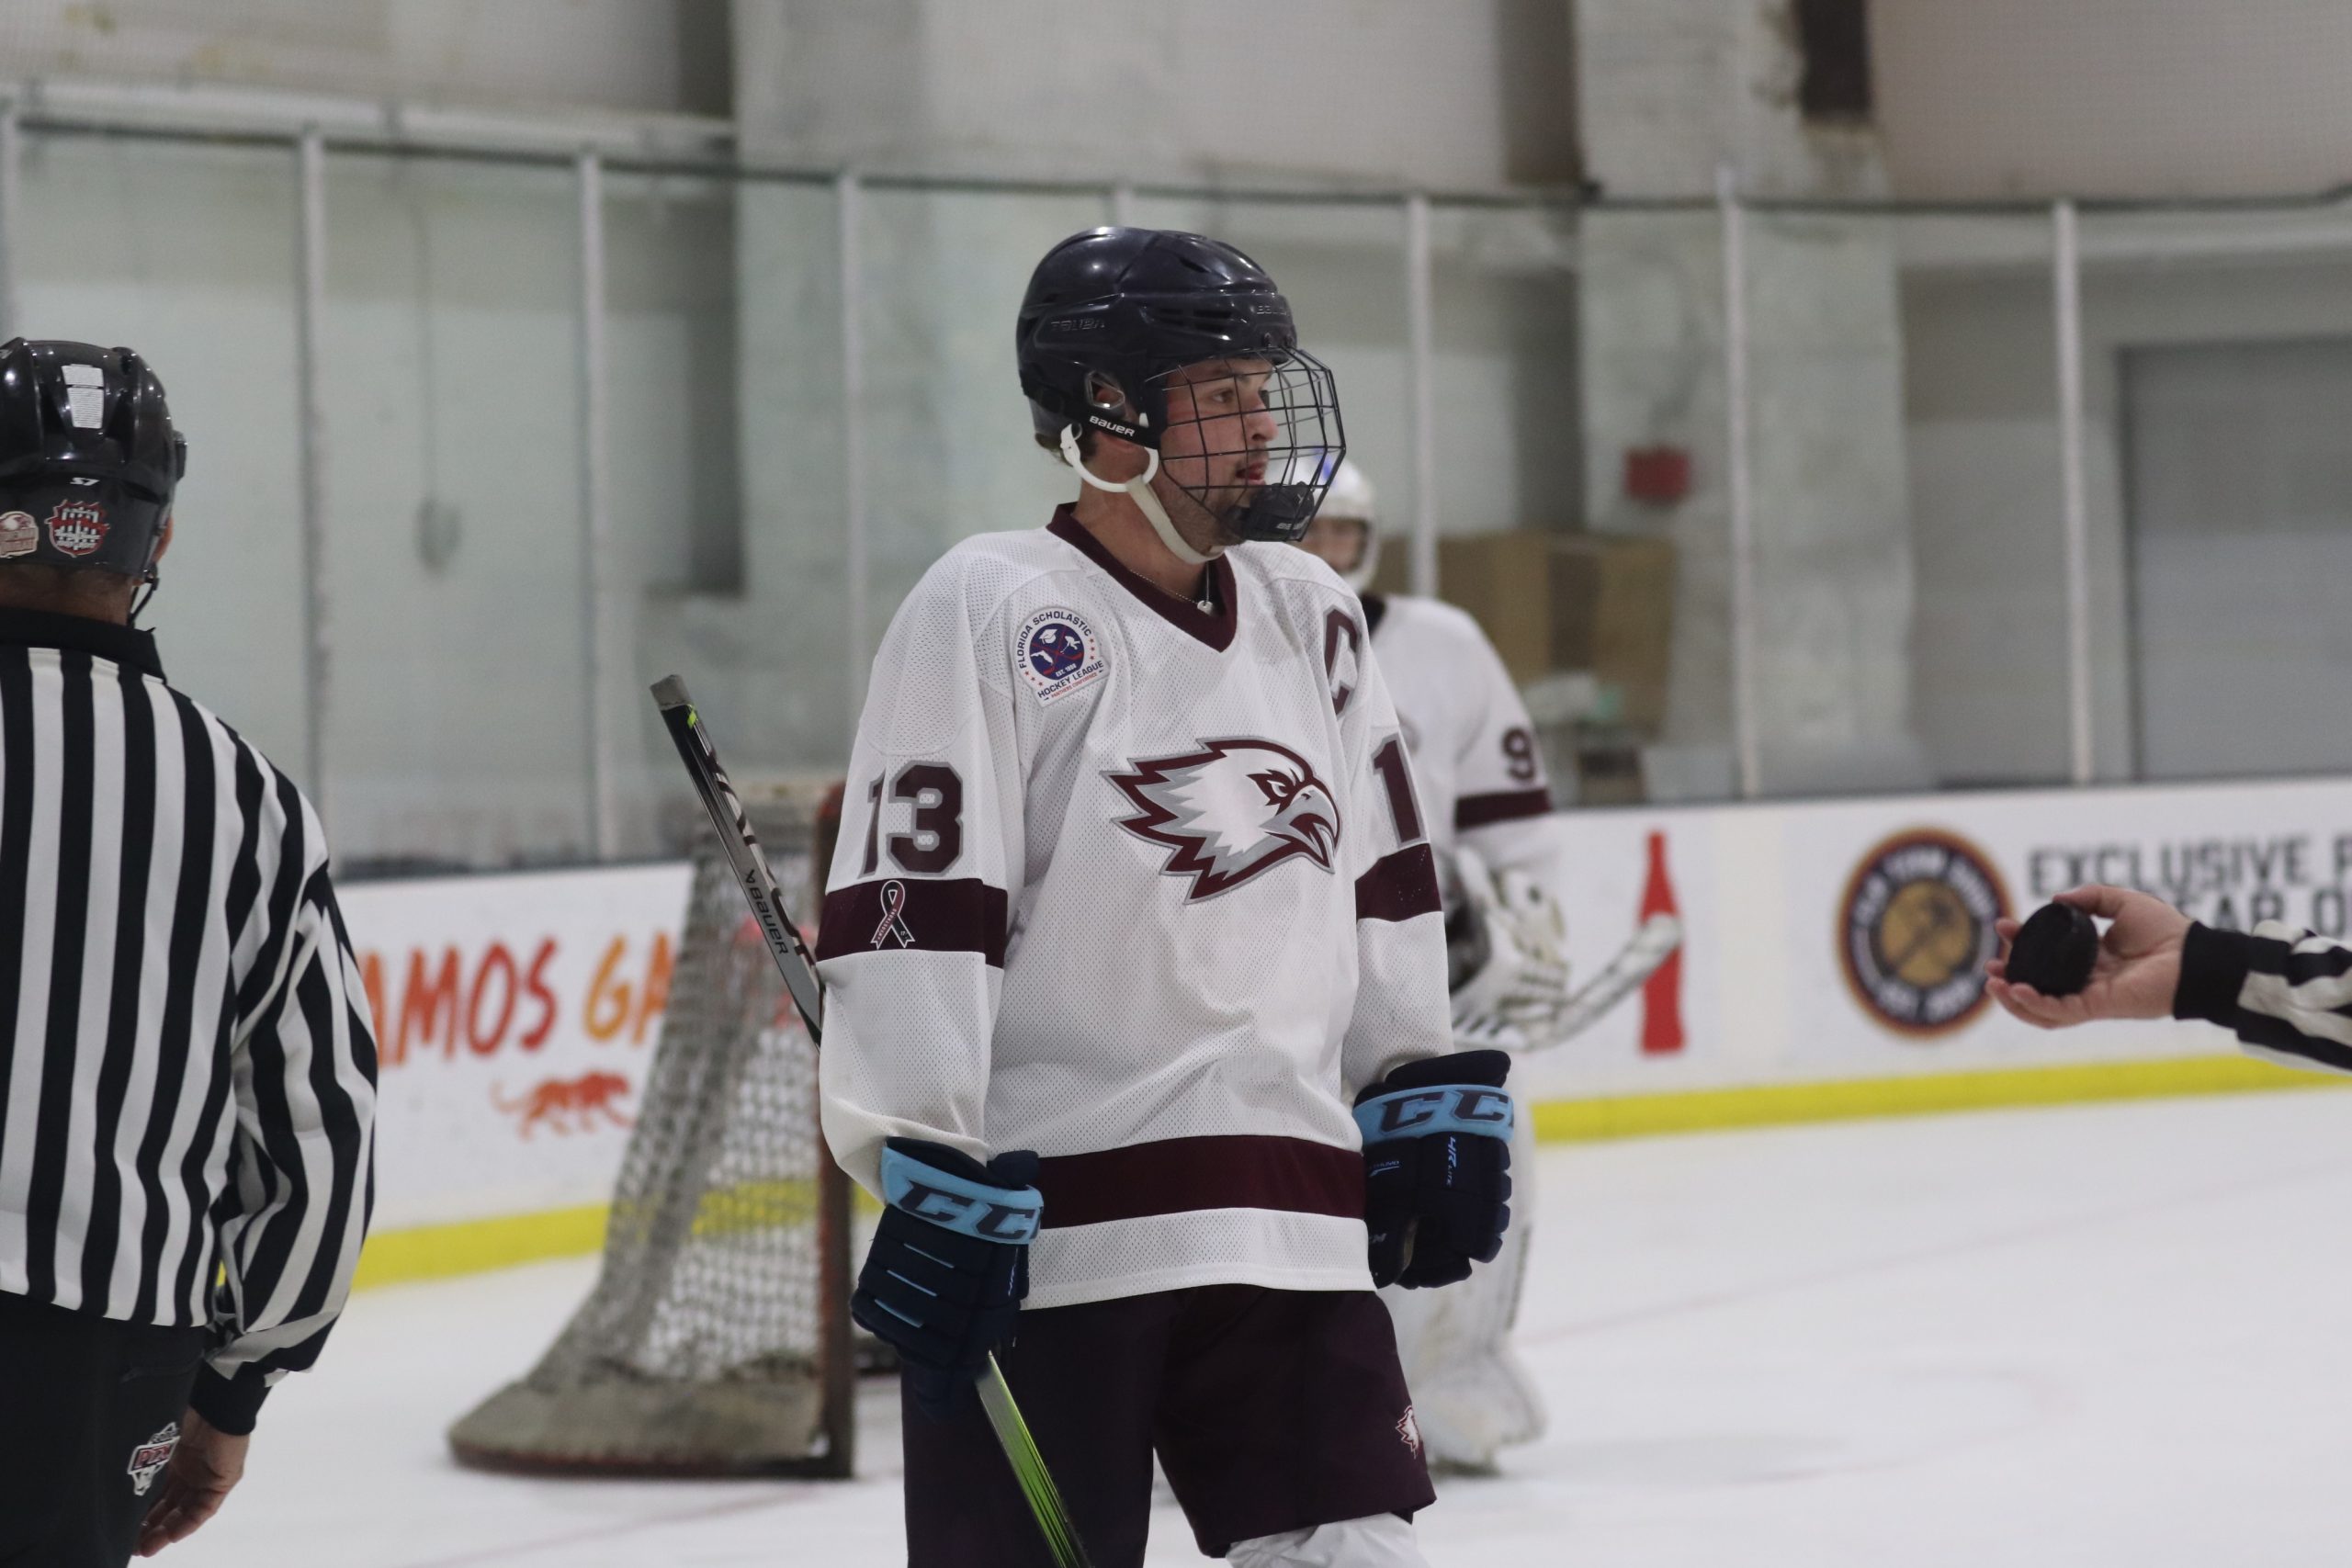 Forward Luke Colton (13) prepares for face off against North Broward Preparatory School. The game took place on Nov. 27 at the Panthers Ice Den.